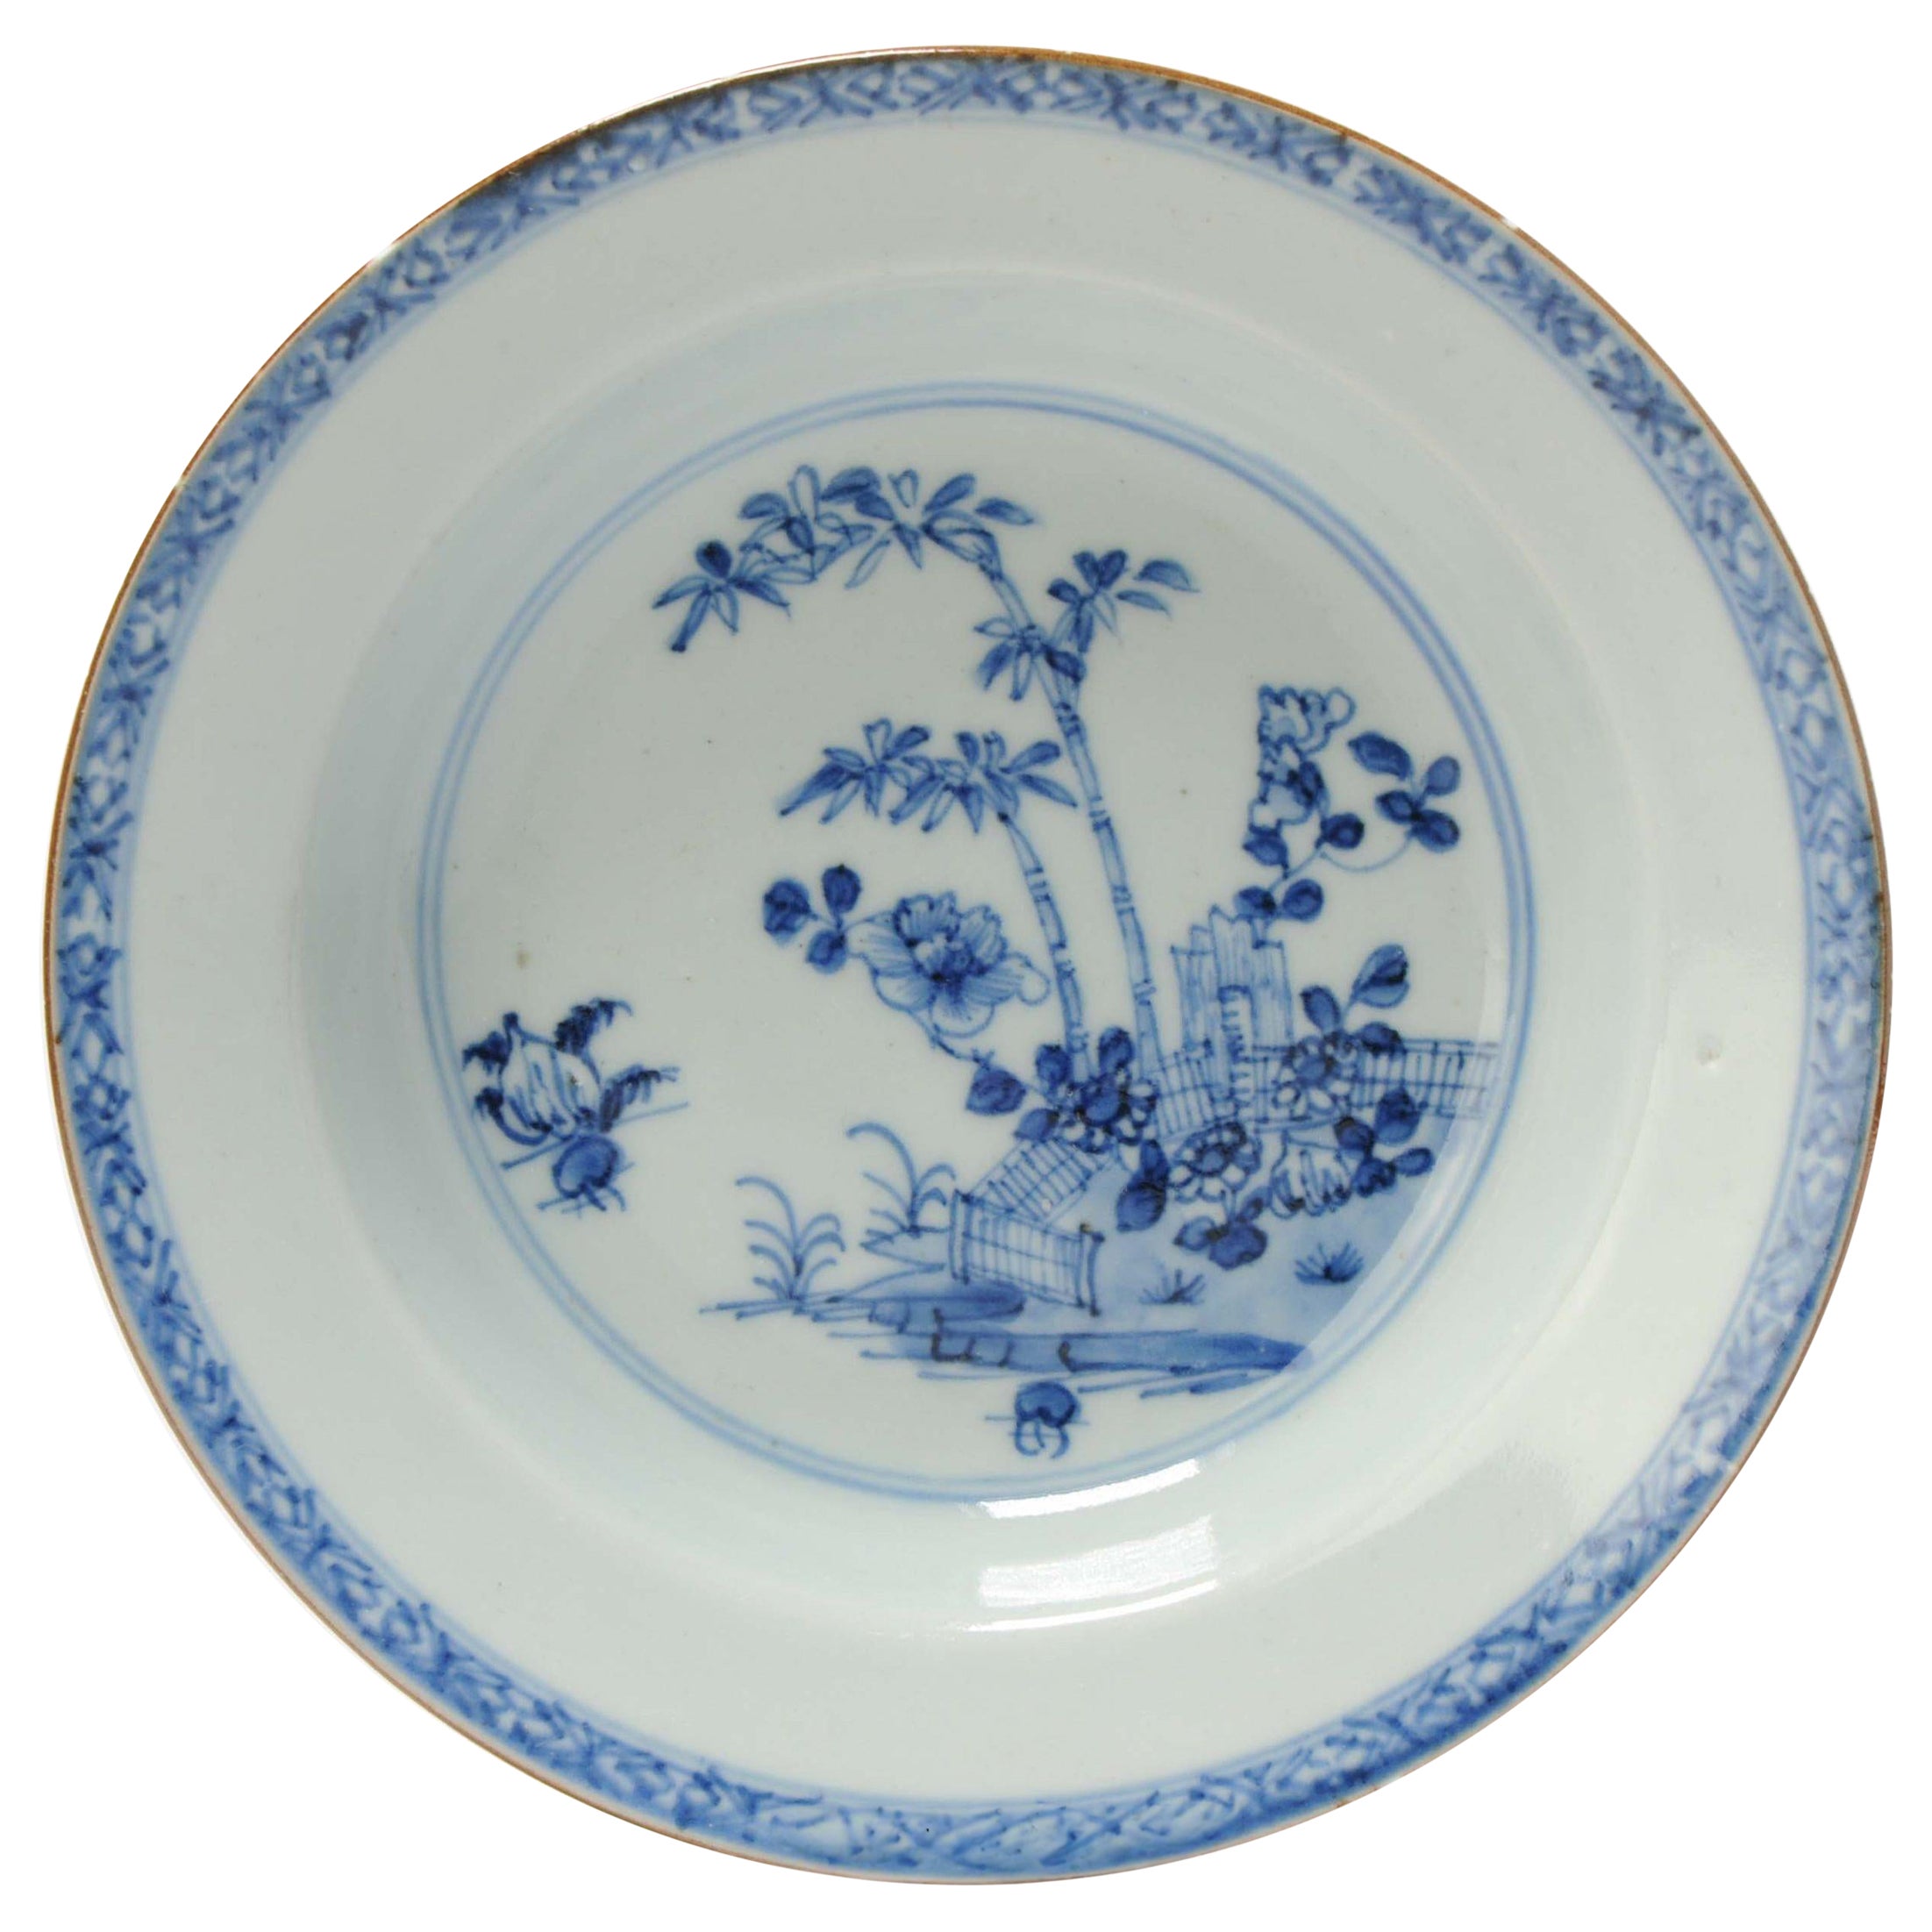 Antique Garden scene Chinese Porcelain Dish Qing Blue and White, 18th Century